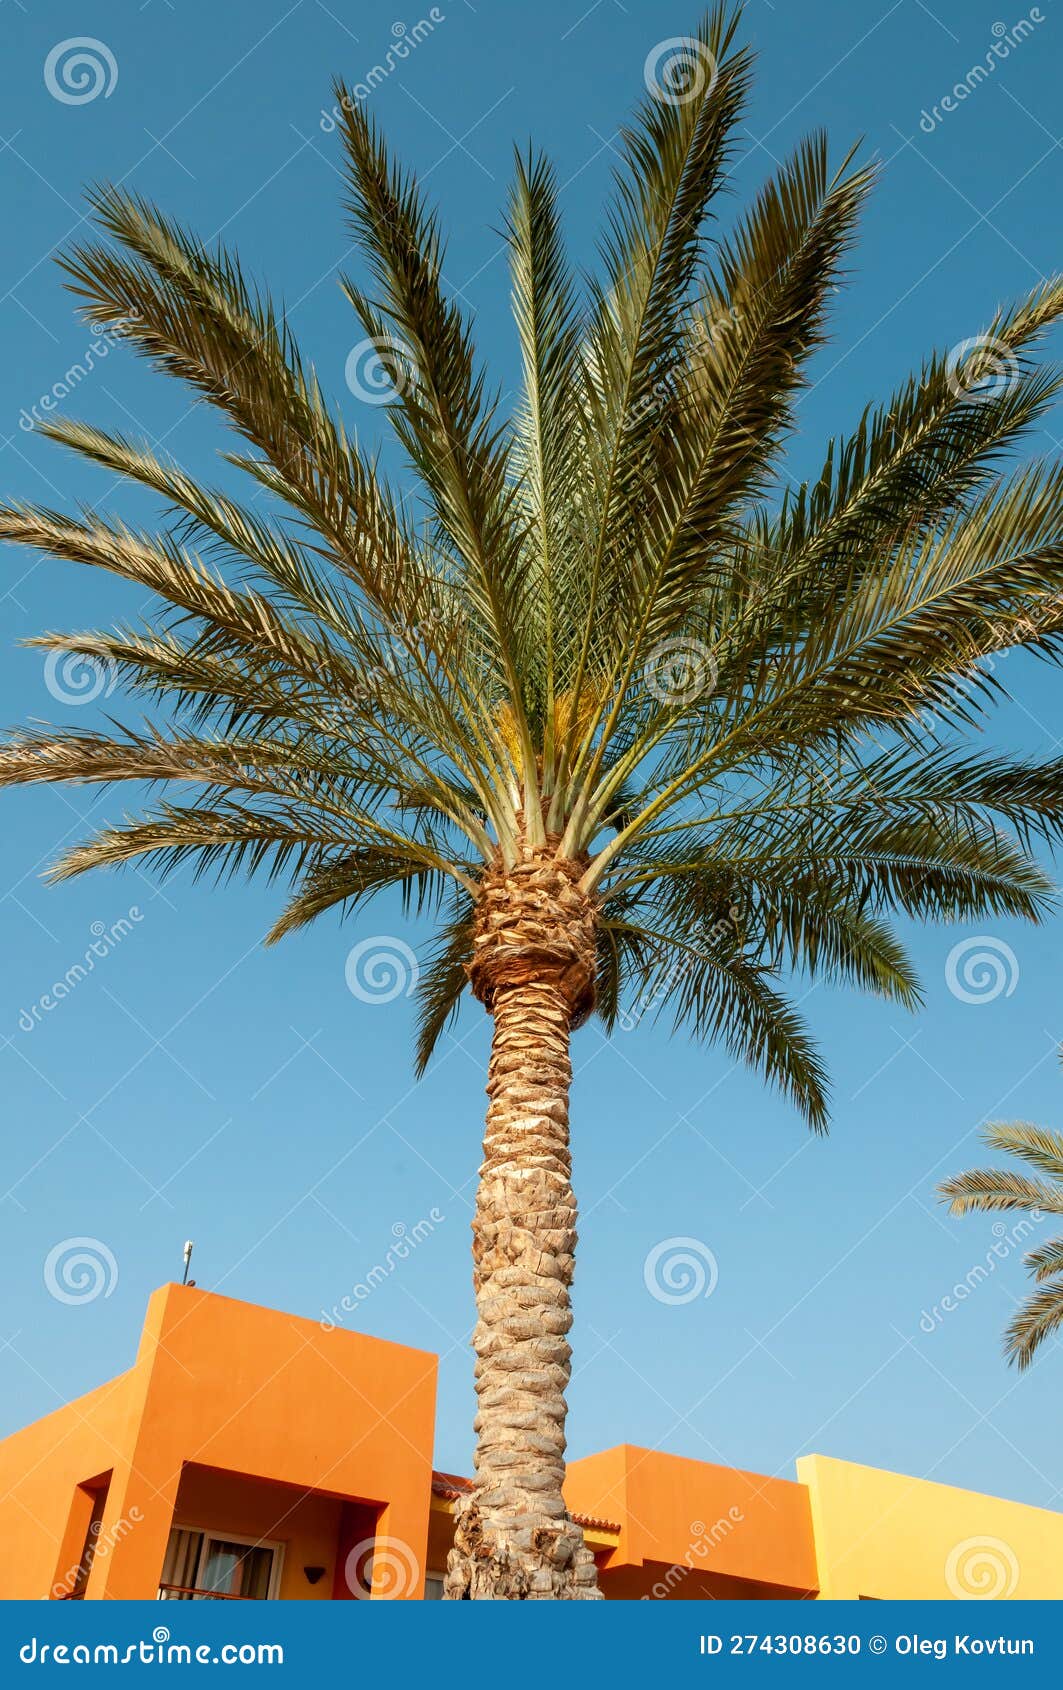 palm trees in the interior of the hotel in marsa alama, egypt